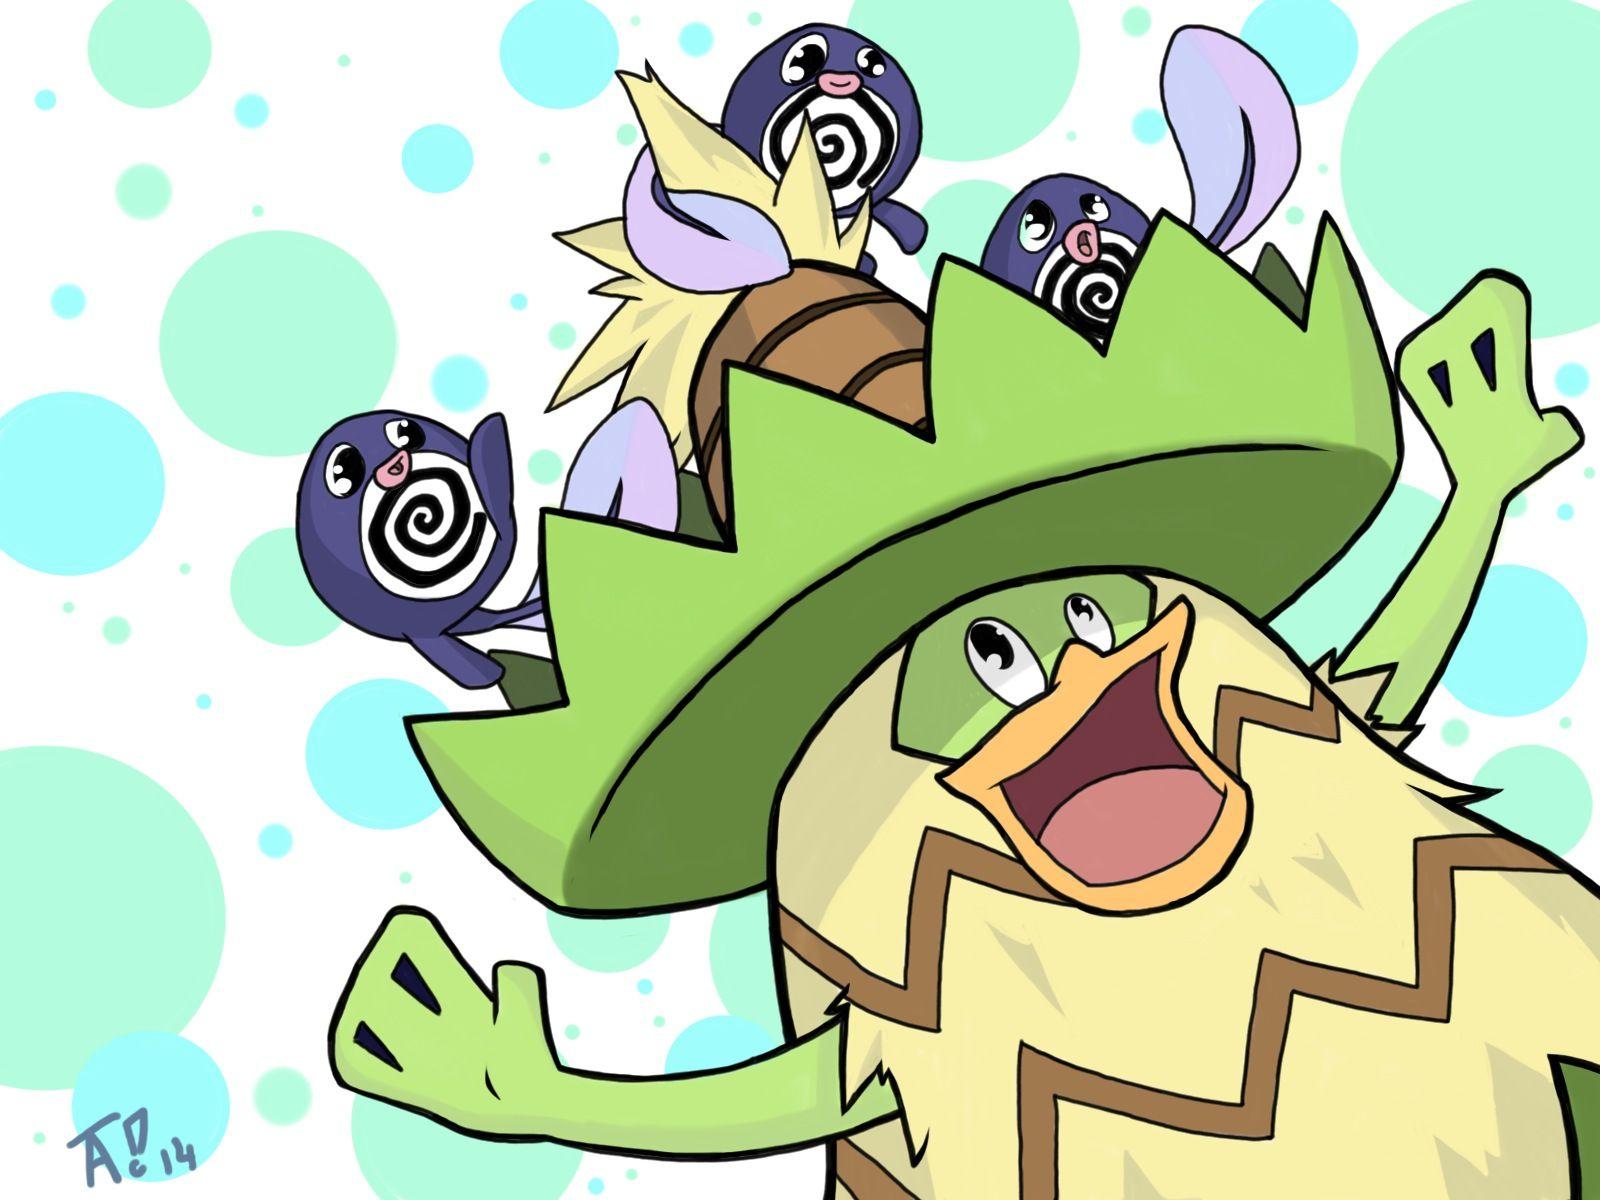 Ludicolo and Poliwags